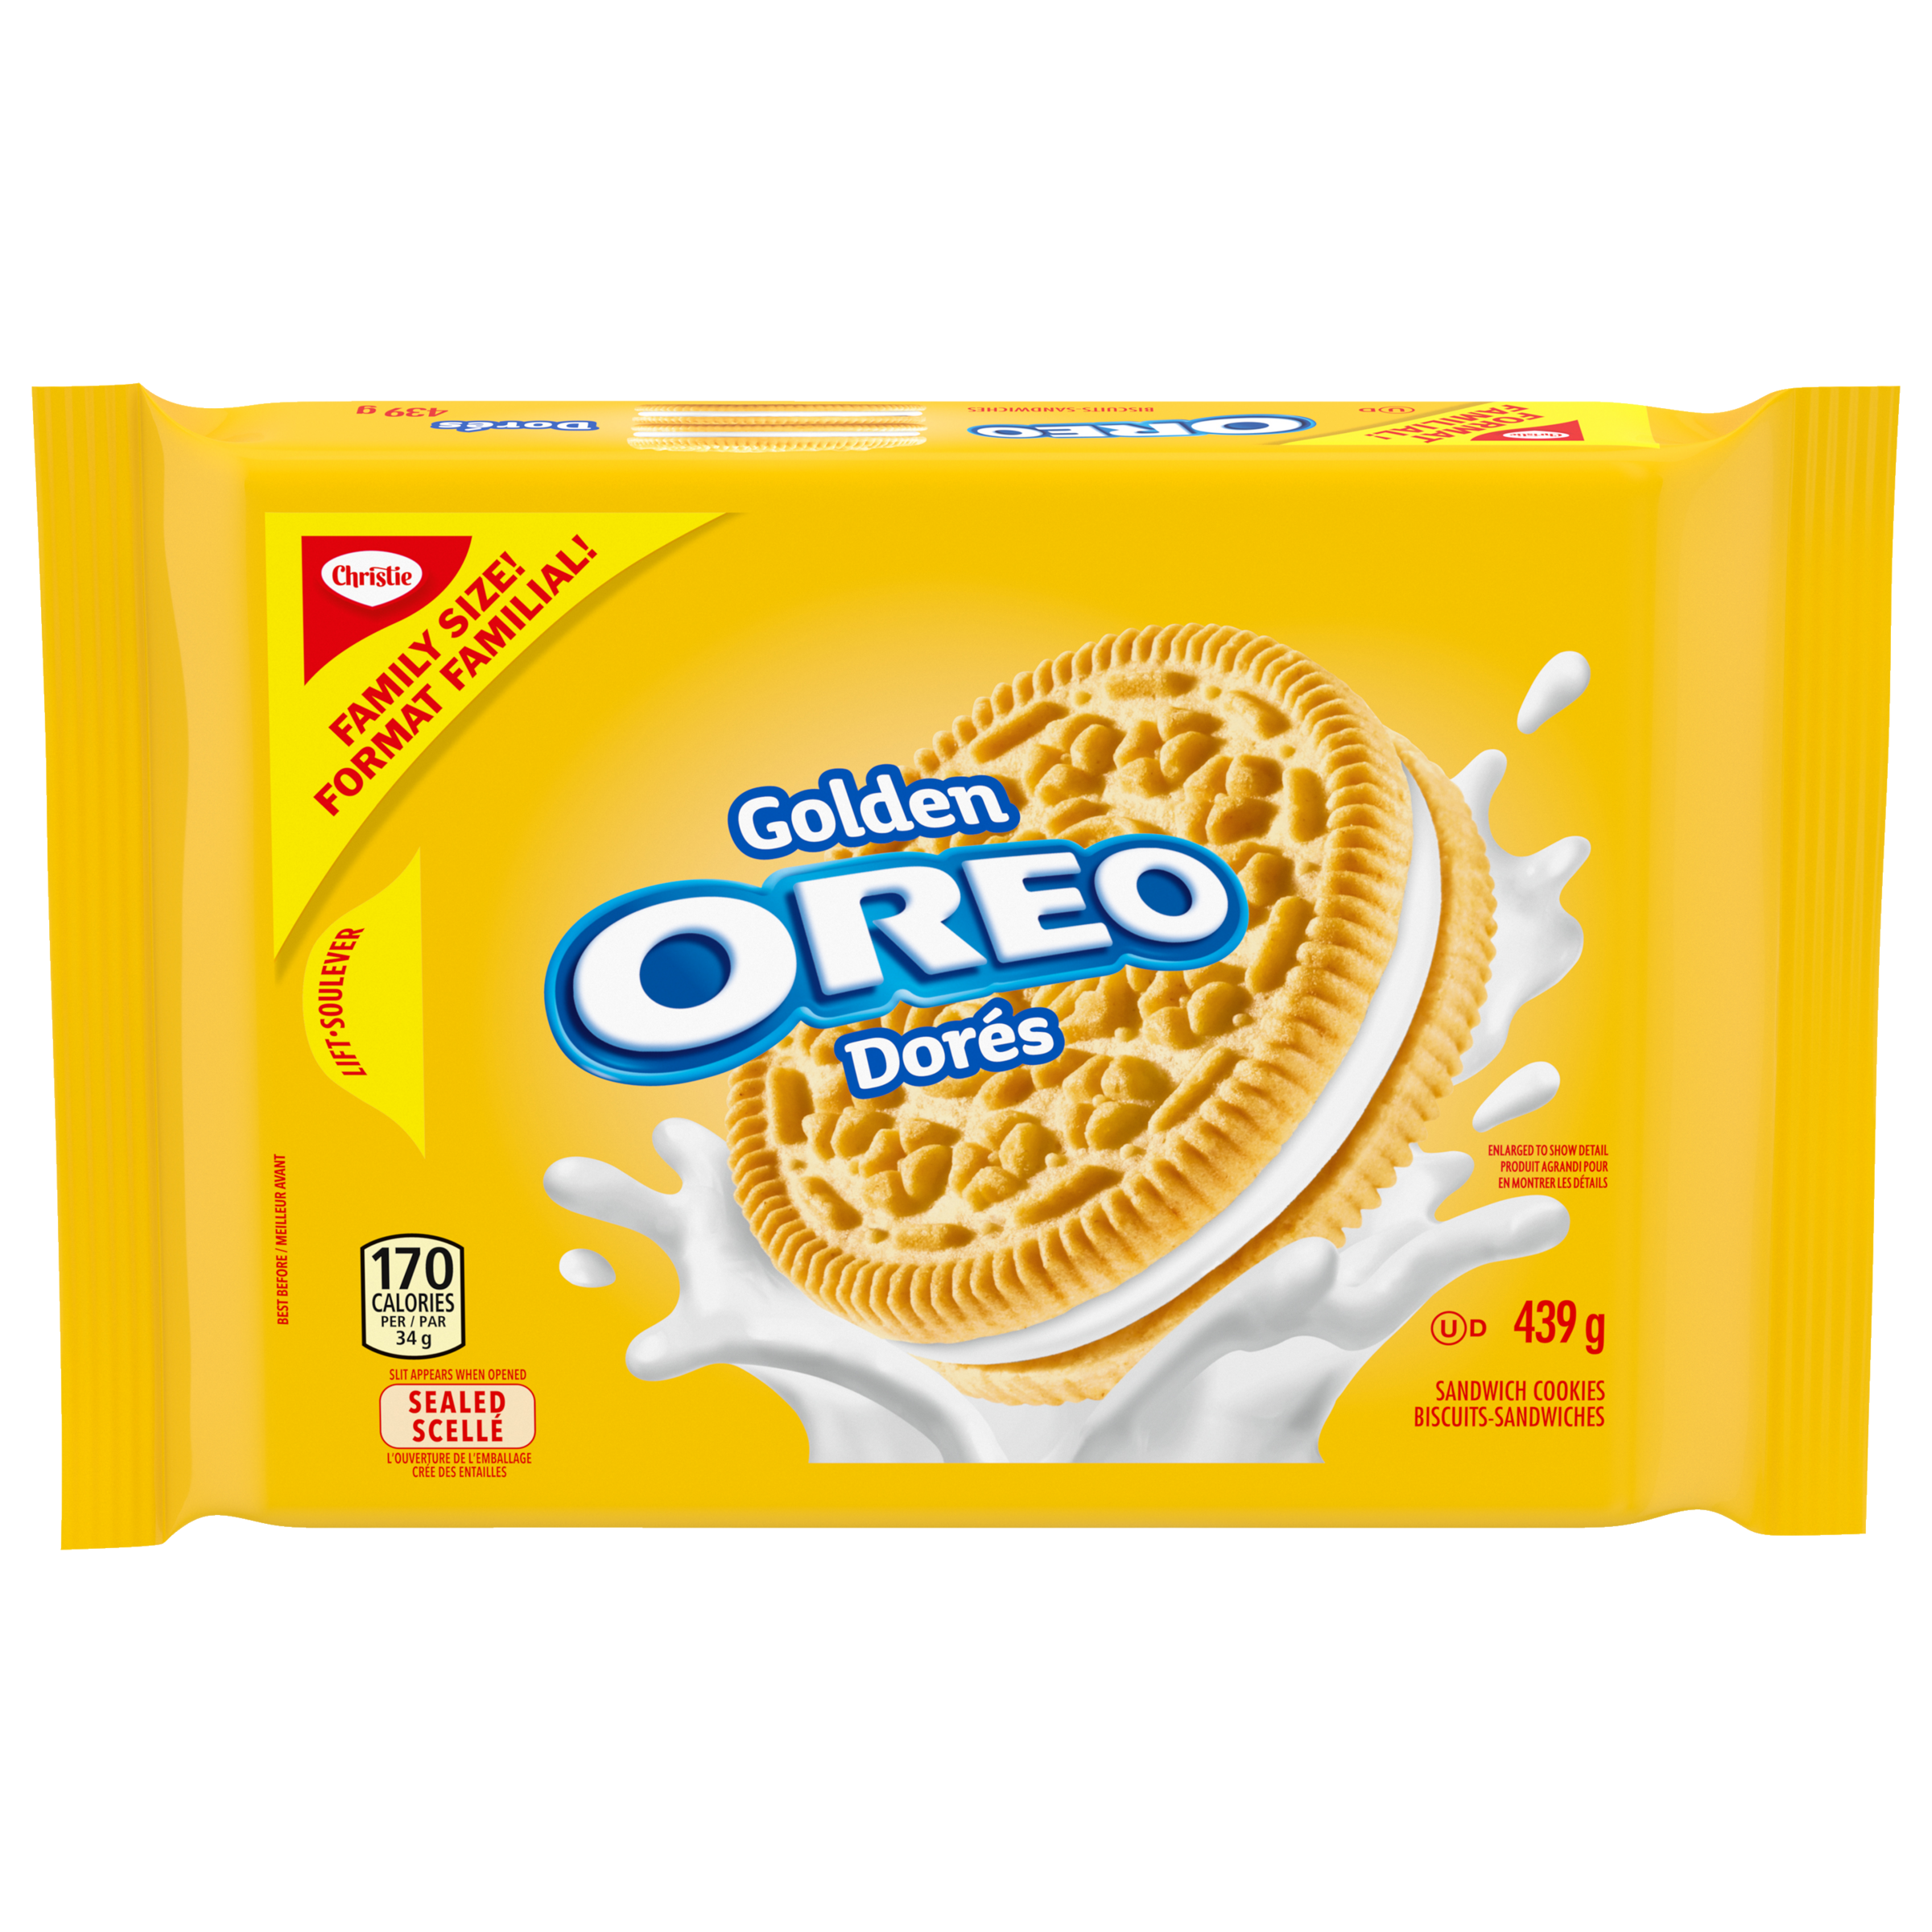 OREO Golden Sandwich Cookies, 1 Family Size Resealable Pack (439g)